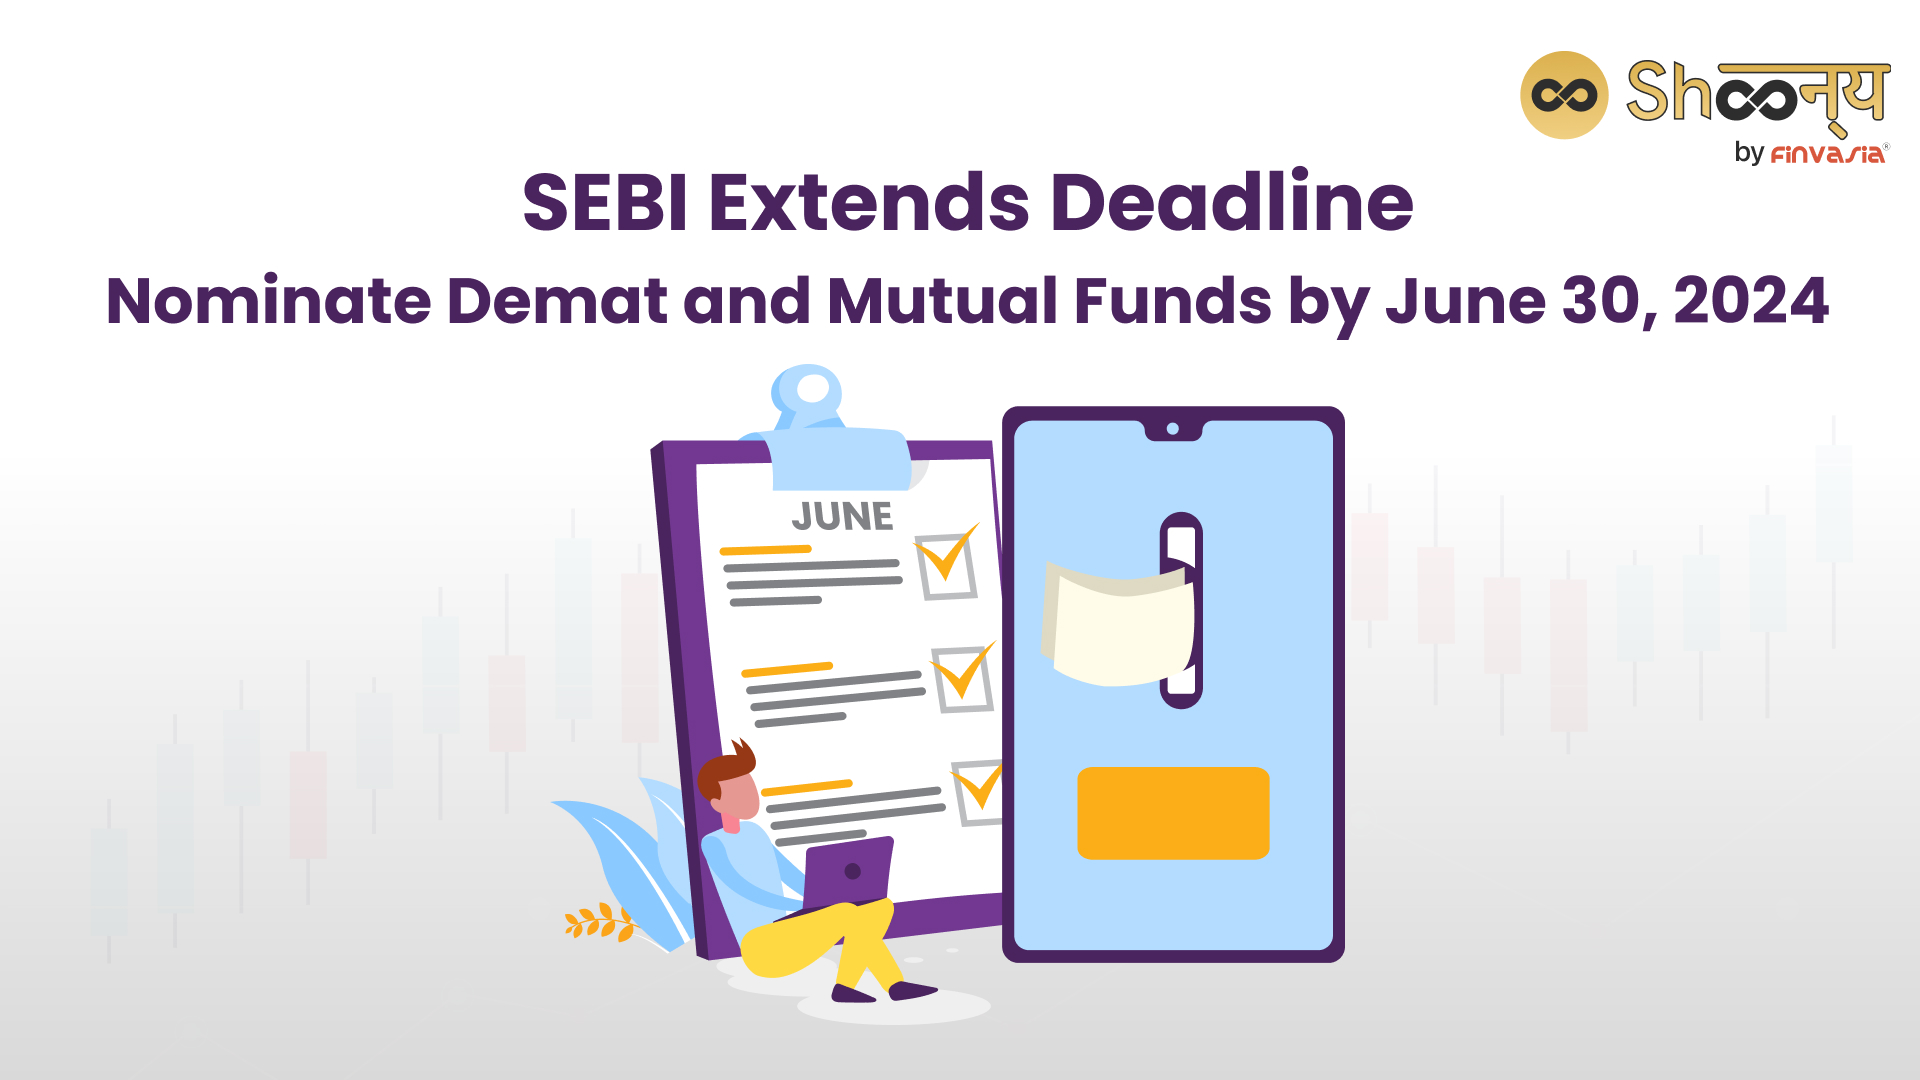 Deadline for Demat and Mutual Fund Nomination: 30th June 2024